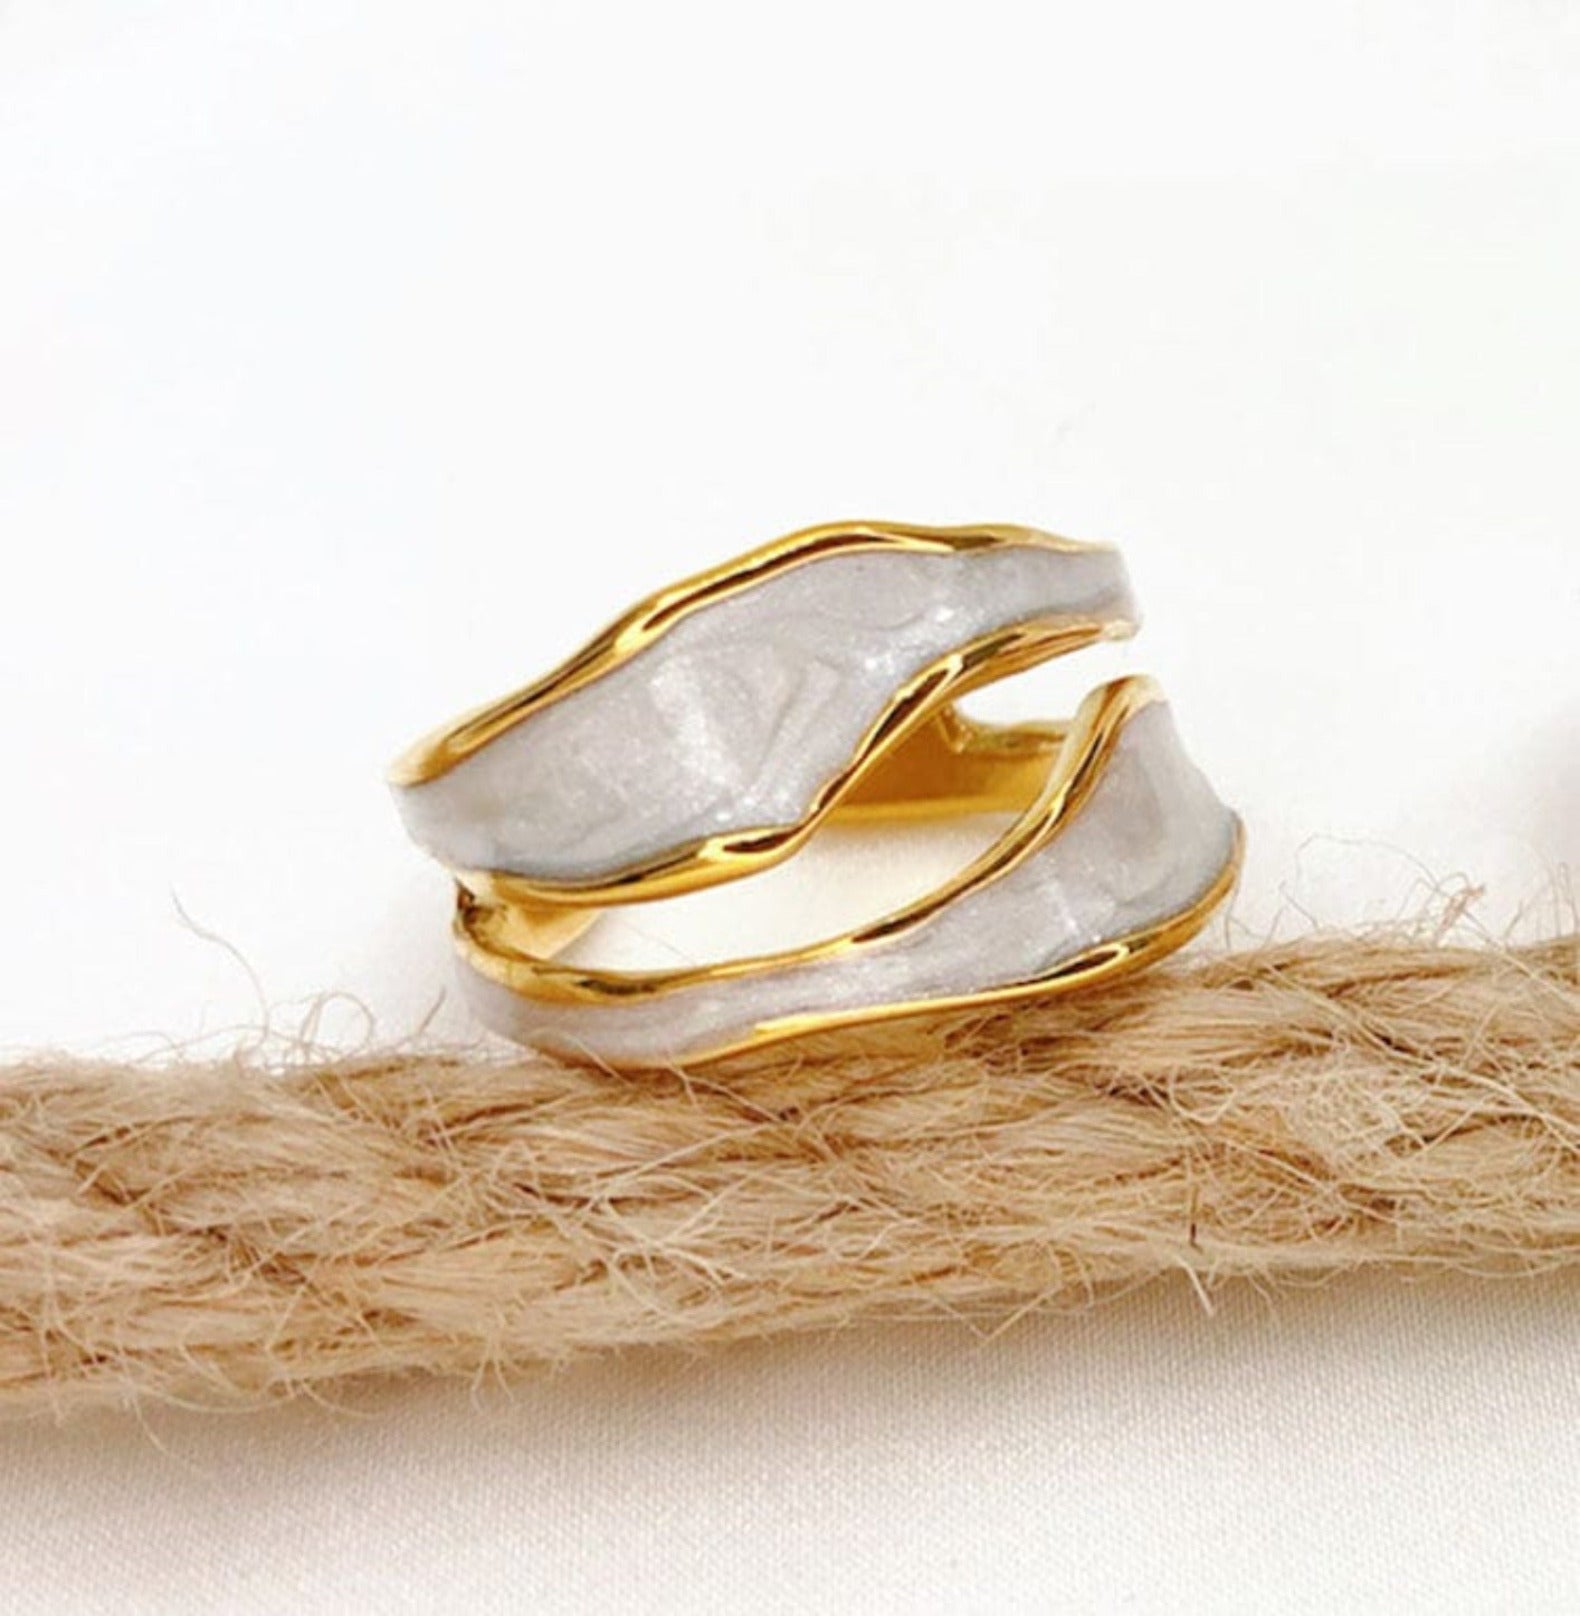 ENAMELO RING earing Yubama Jewelry Online Store - The Elegant Designs of Gold and Silver ! White 